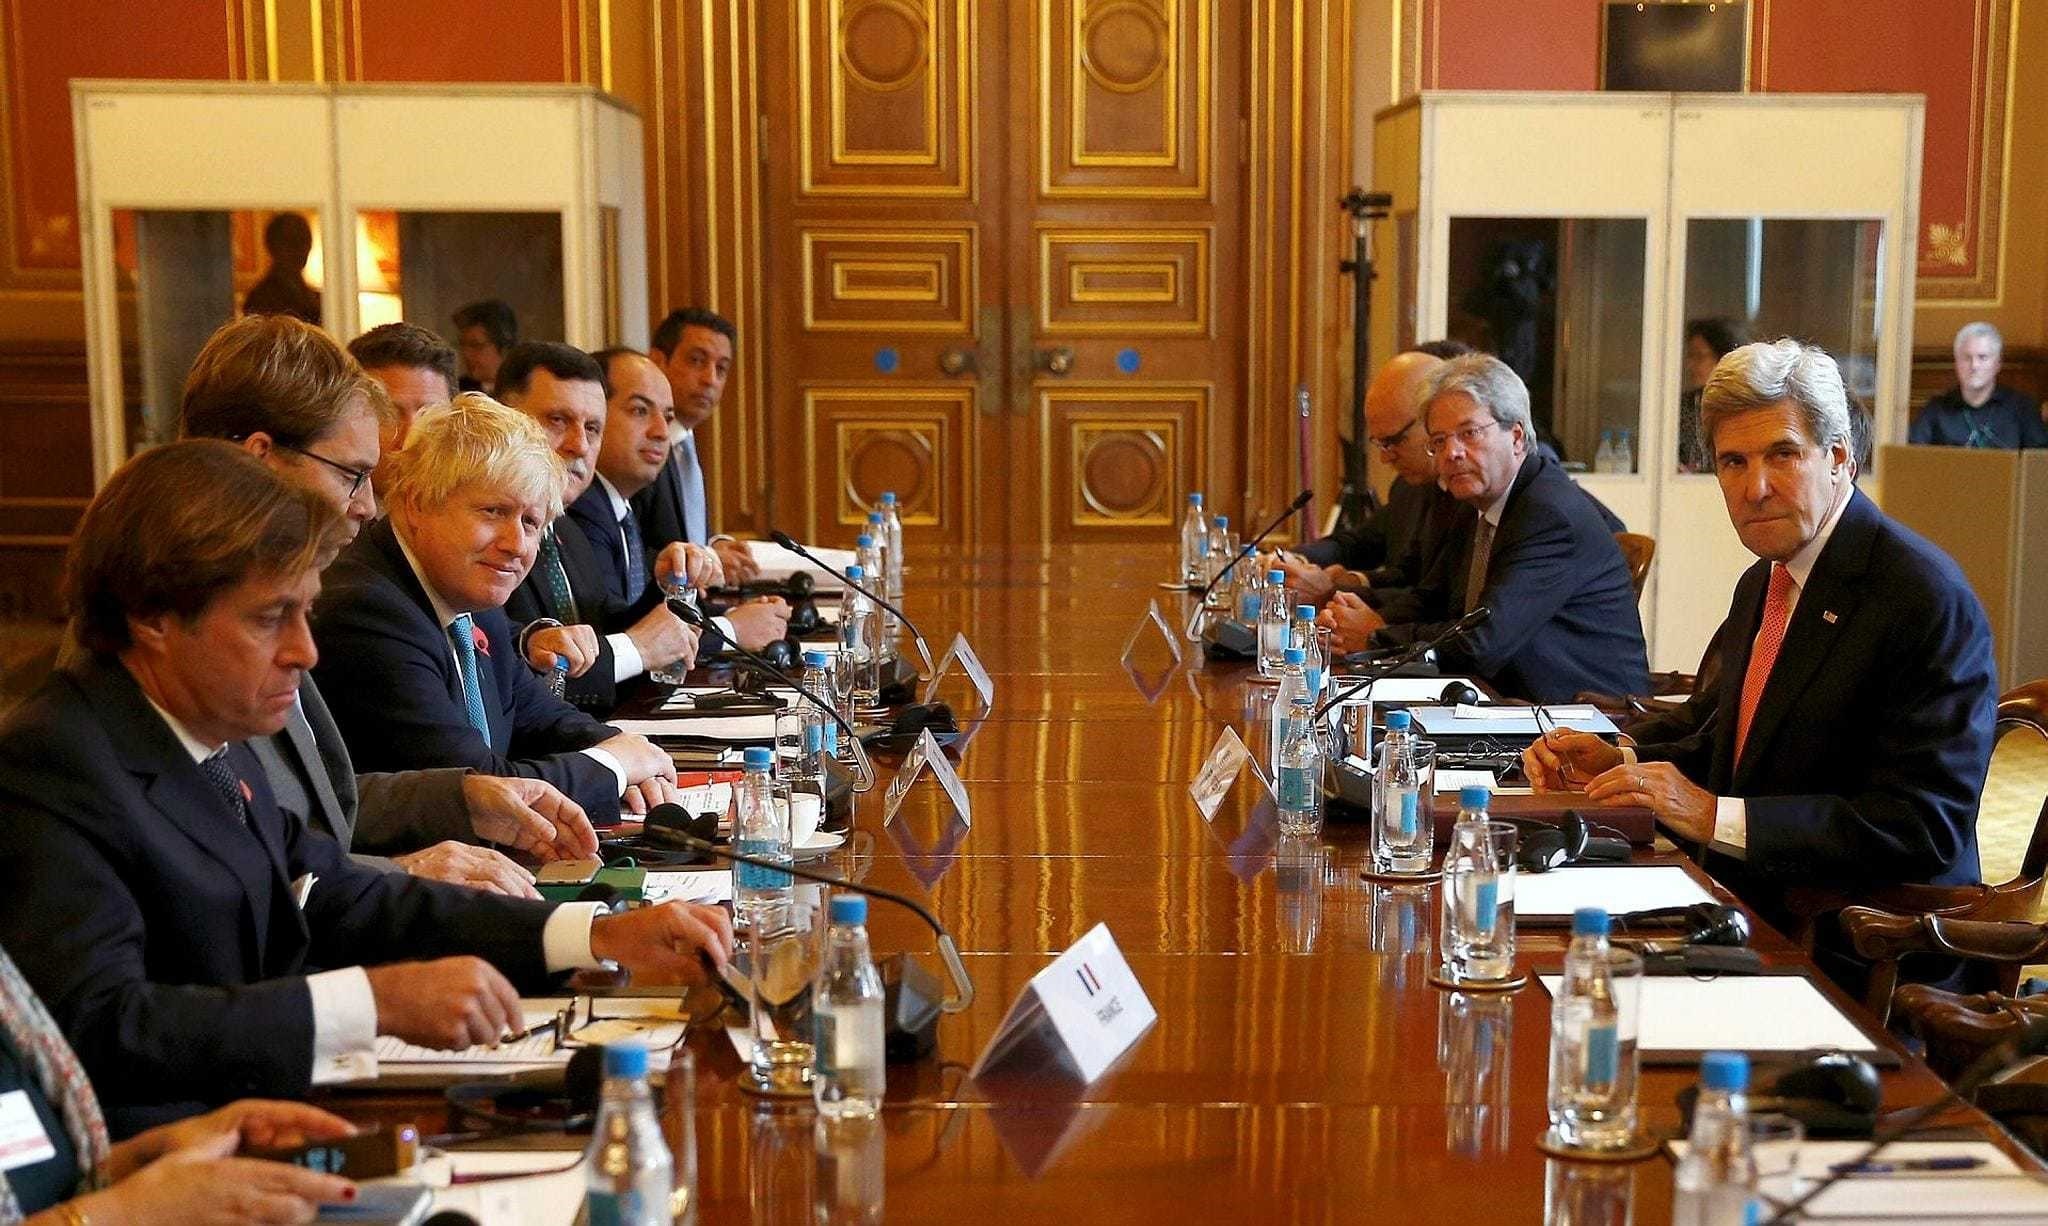 U.S. Secretary of State John Kerry attends the Libyan Ministerial meeting with Britain's Foreign Secretary Boris Johnson and Libya's Prime Minister and Deputy Prime minister, at the Foreign and Commonwealth Office in London, Britain, Oct. 31.